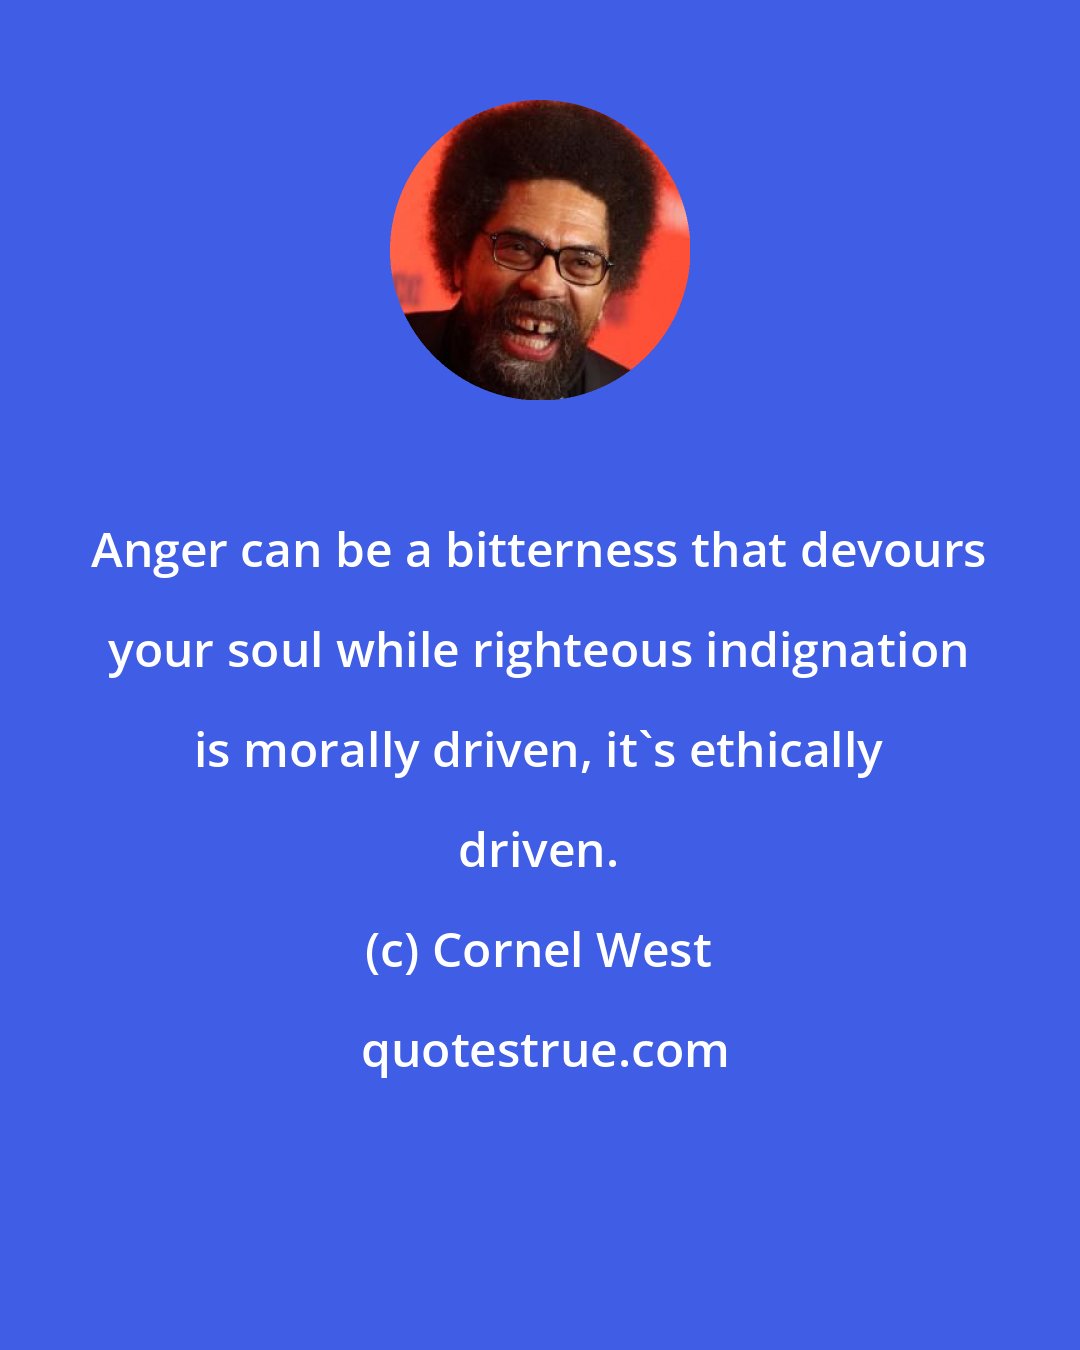 Cornel West: Anger can be a bitterness that devours your soul while righteous indignation is morally driven, it's ethically driven.